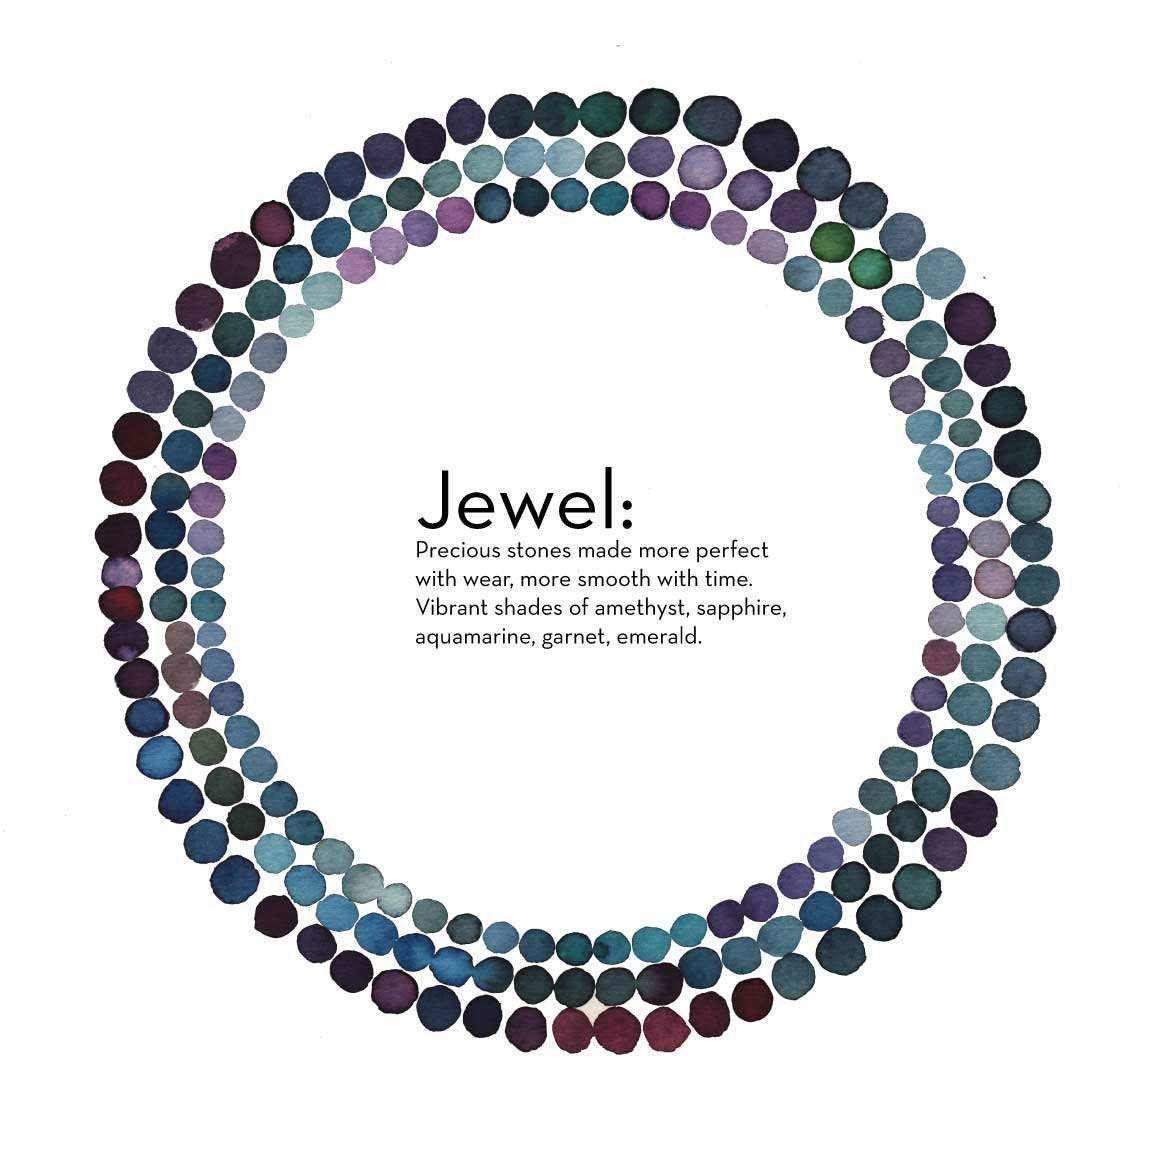 Susie Lubell Ketubah No Personalized Text / 16" x 16" / Jewel Three Rings Ketubah by Susie Lubell - (Choice of Color)